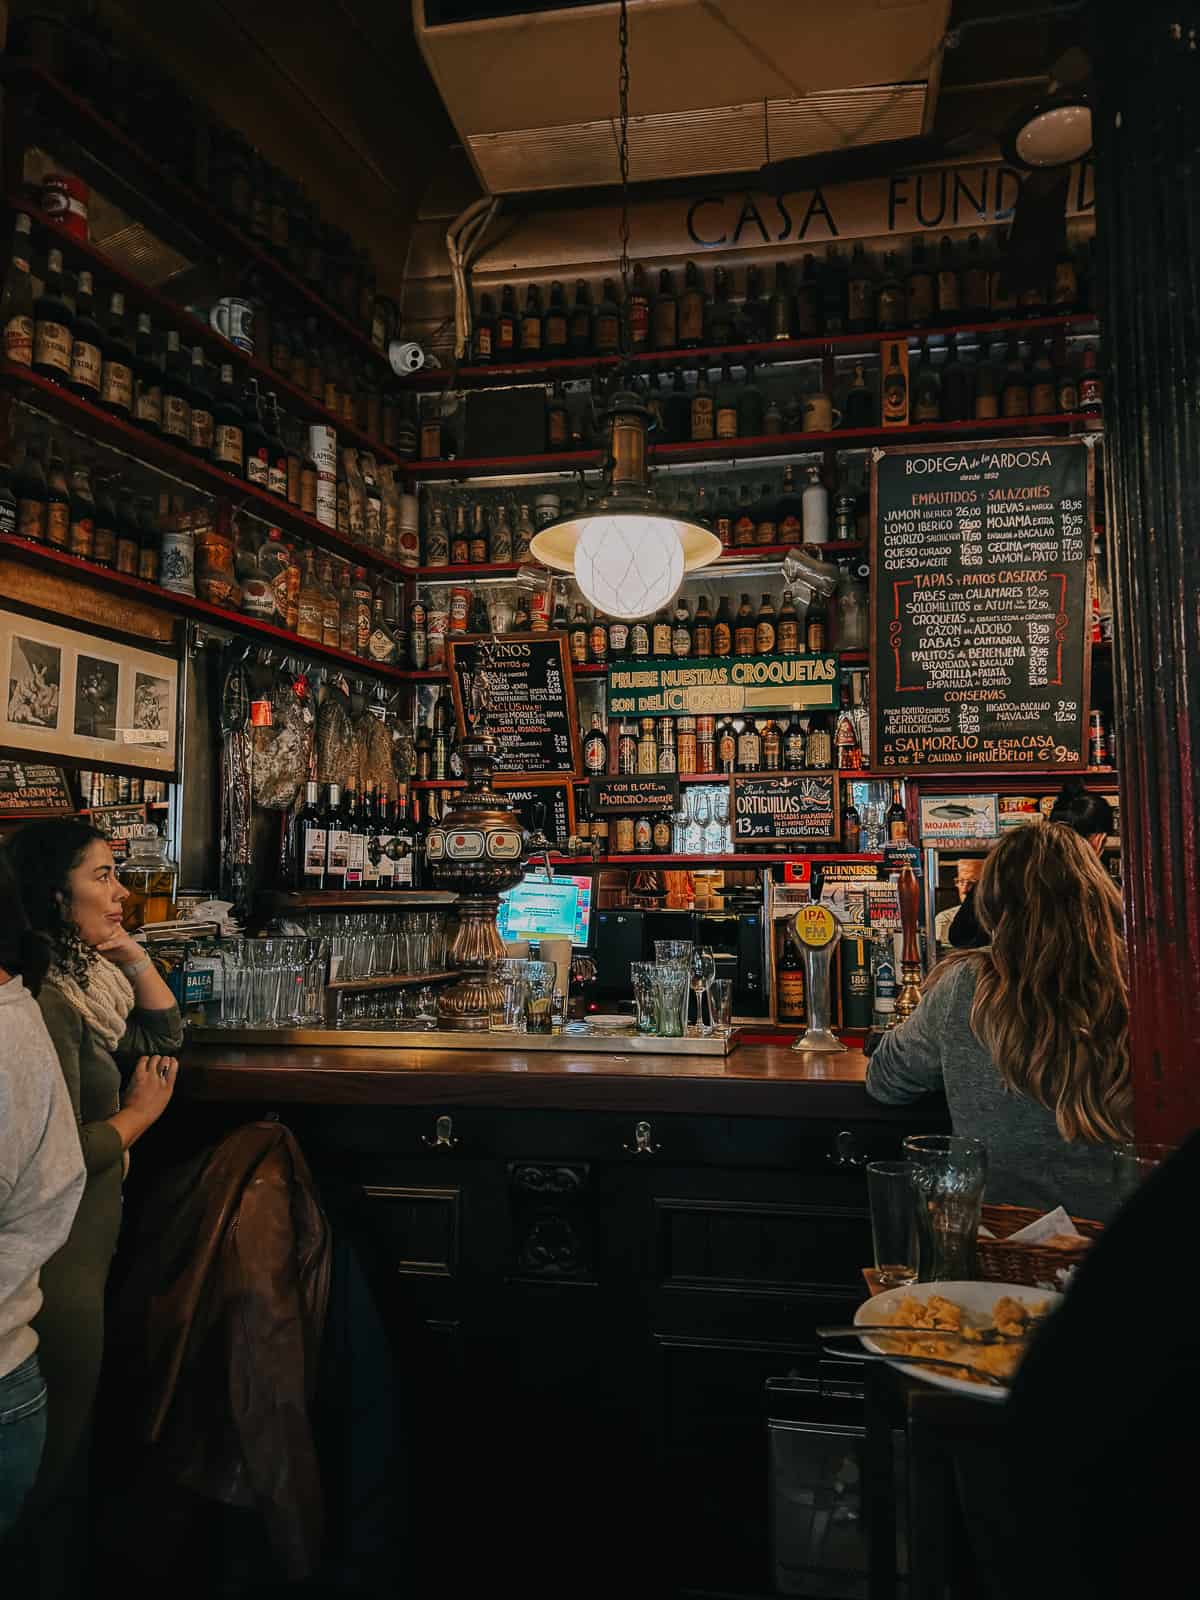 Interior of a classic Spanish bar with a variety of wines and spirits lining the shelves, a detailed menu board, and customers engaged in conversation by the wooden bar counter